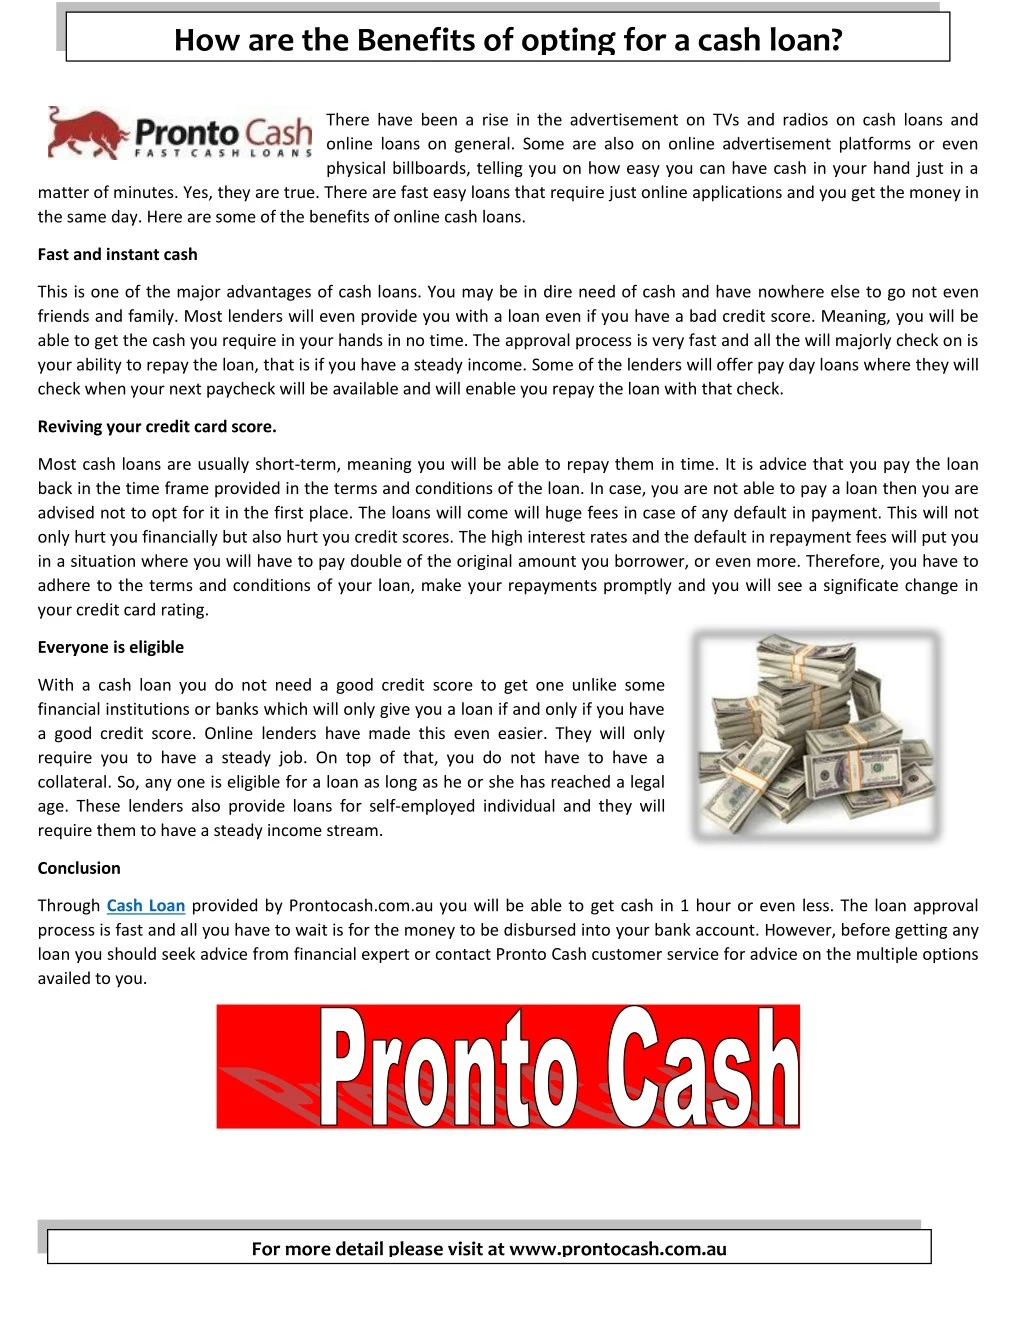 how are the benefits of opting for a cash loan